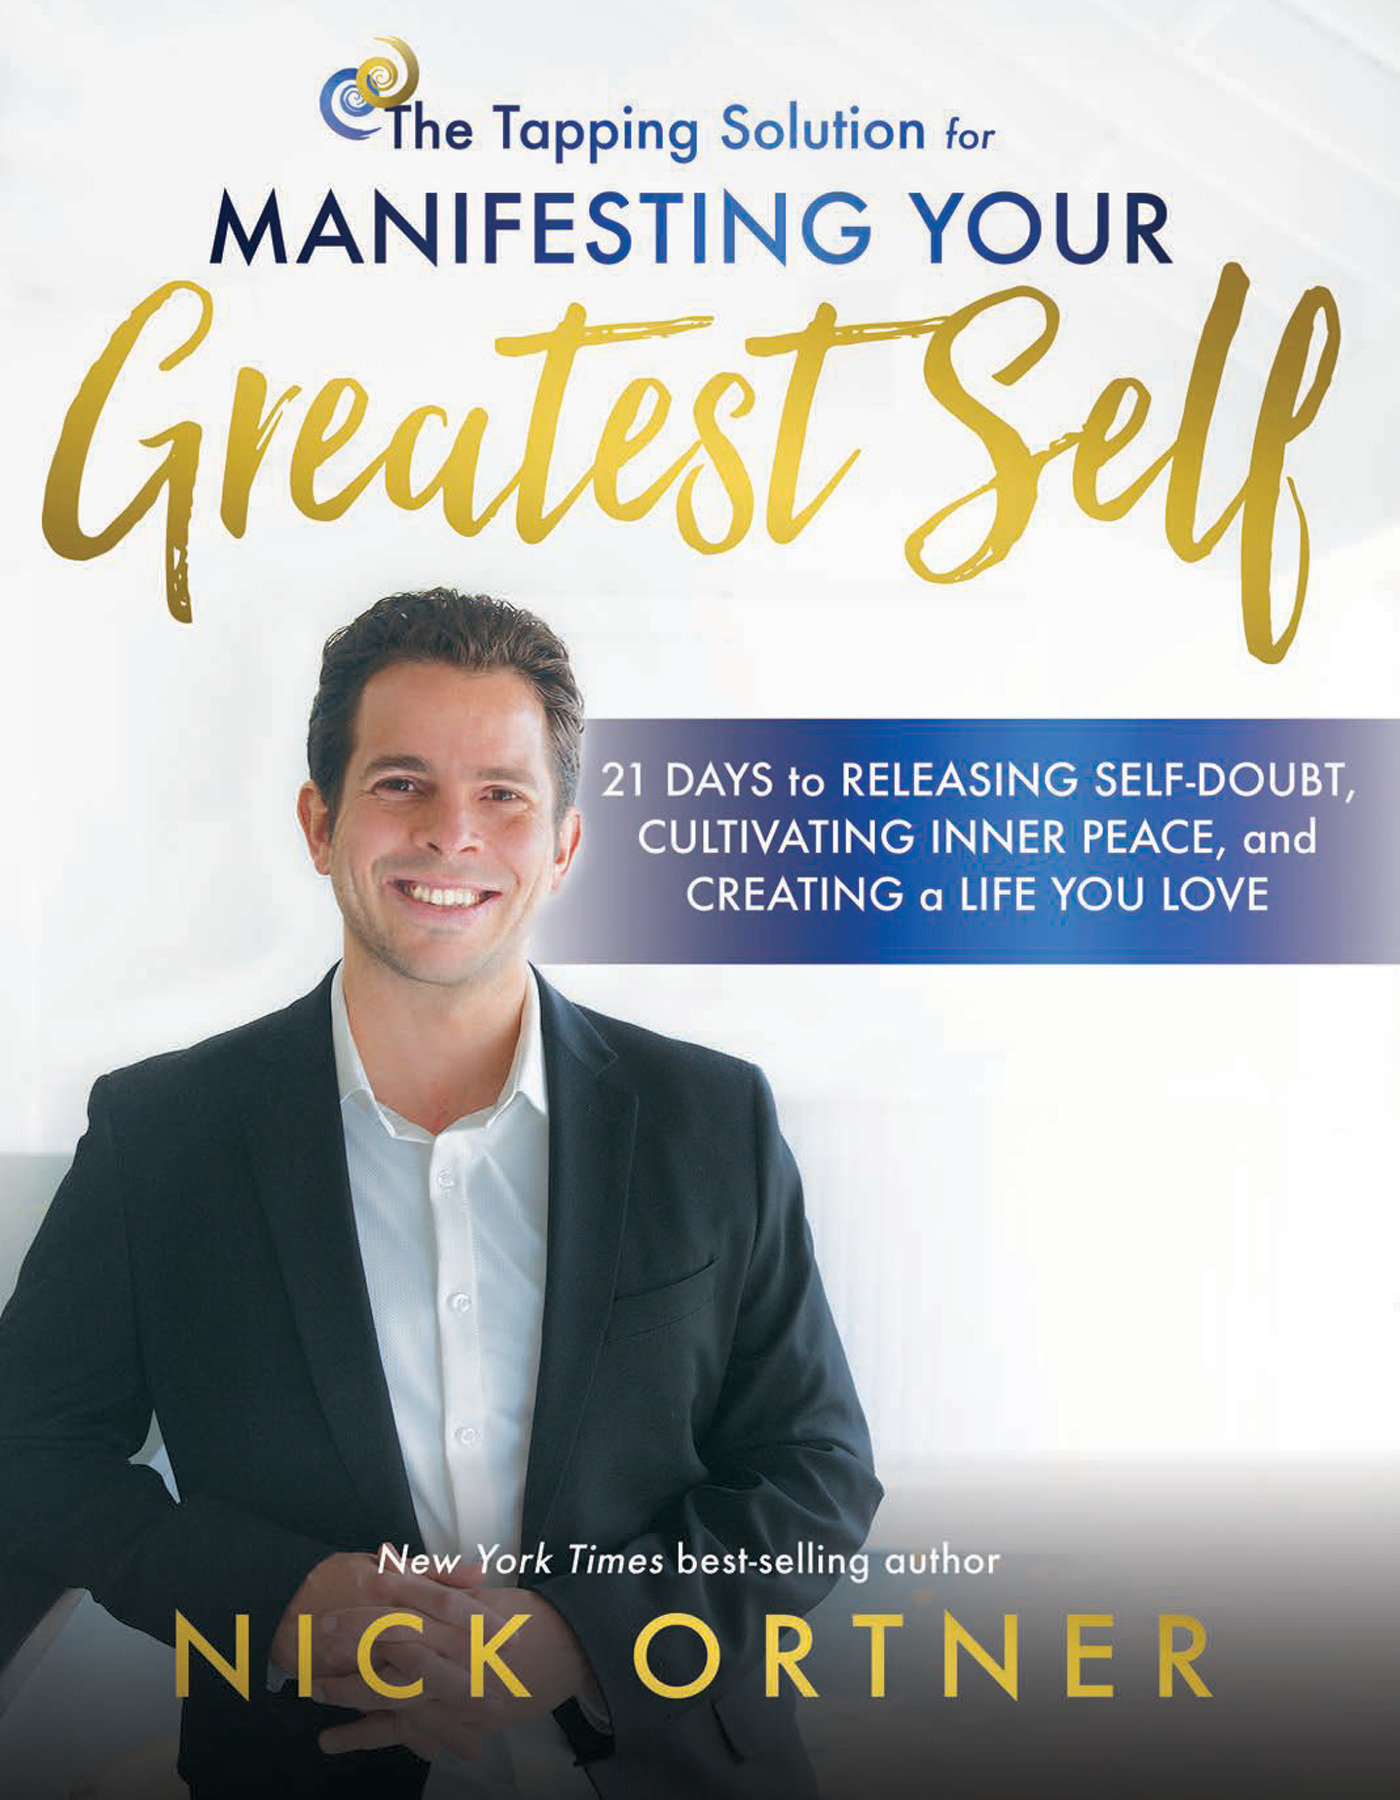 The Tapping Solution for Manifesting Your Greatest Self 21 Days to Releasing Self-Doubt, Cultivating Inner Peace, and Creating a Life You Love cover image